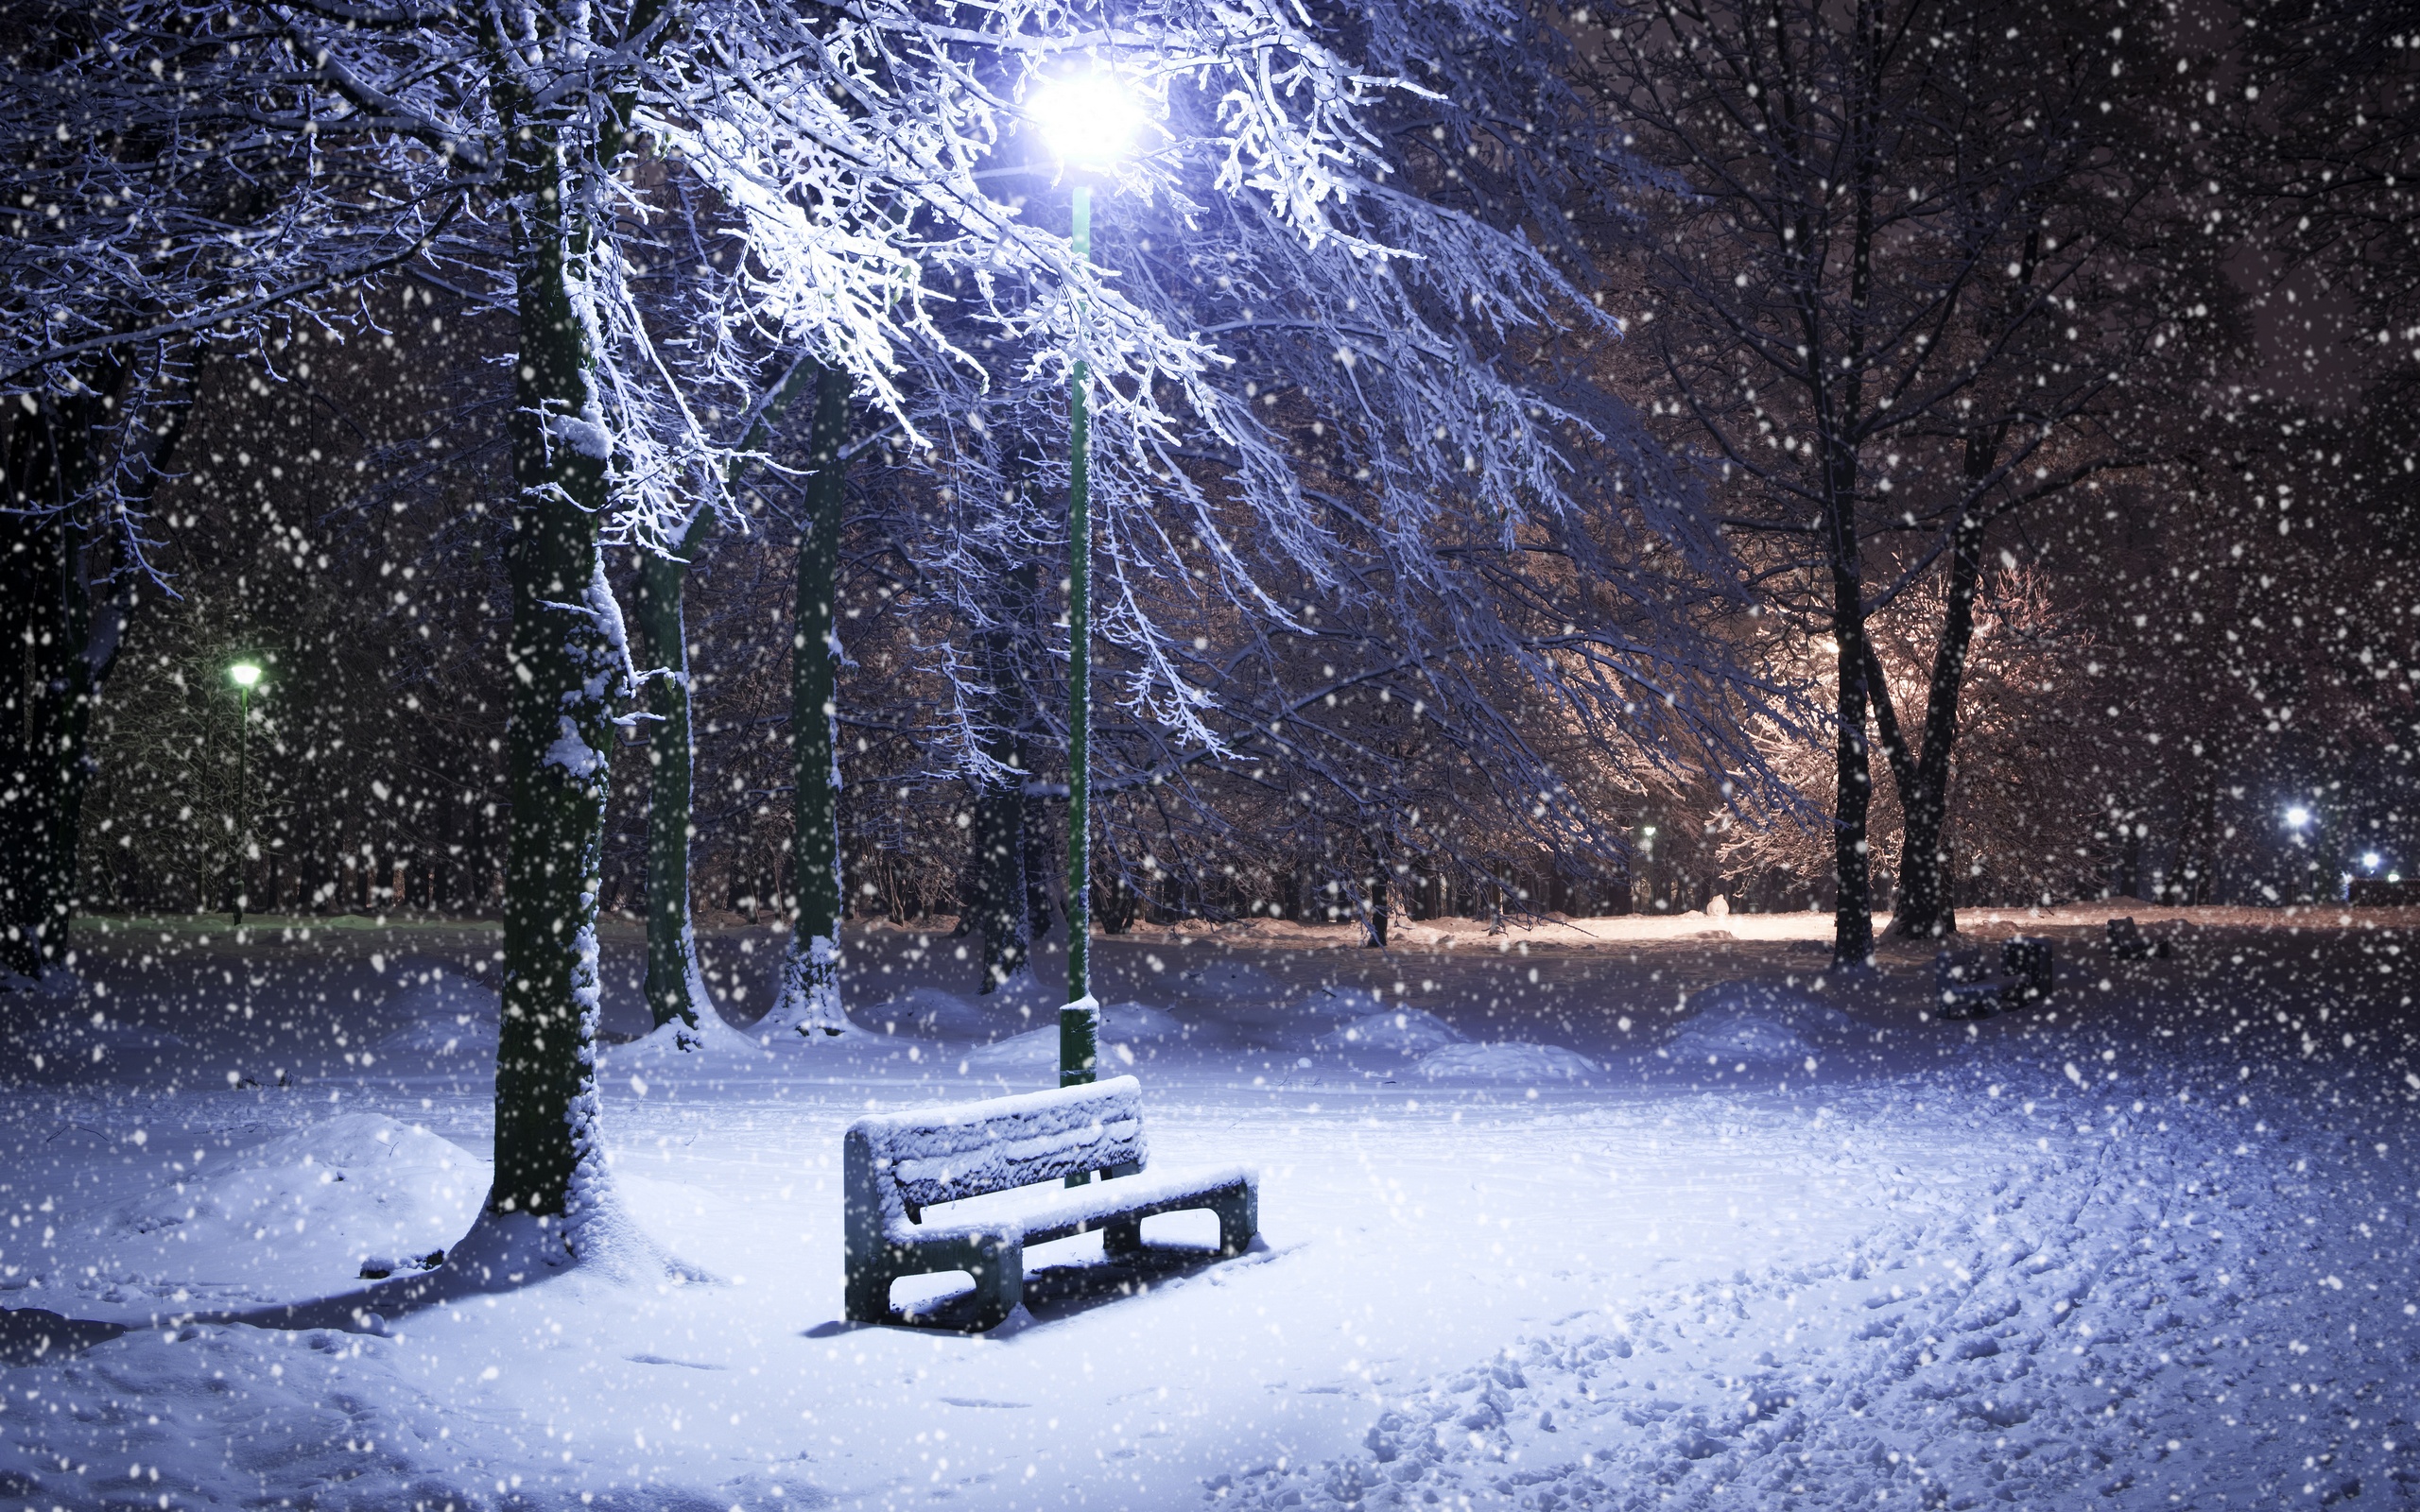 Cool Winter At Nights Wallpaper Beautiful Wallpaper with 2560x1600 2560x1600